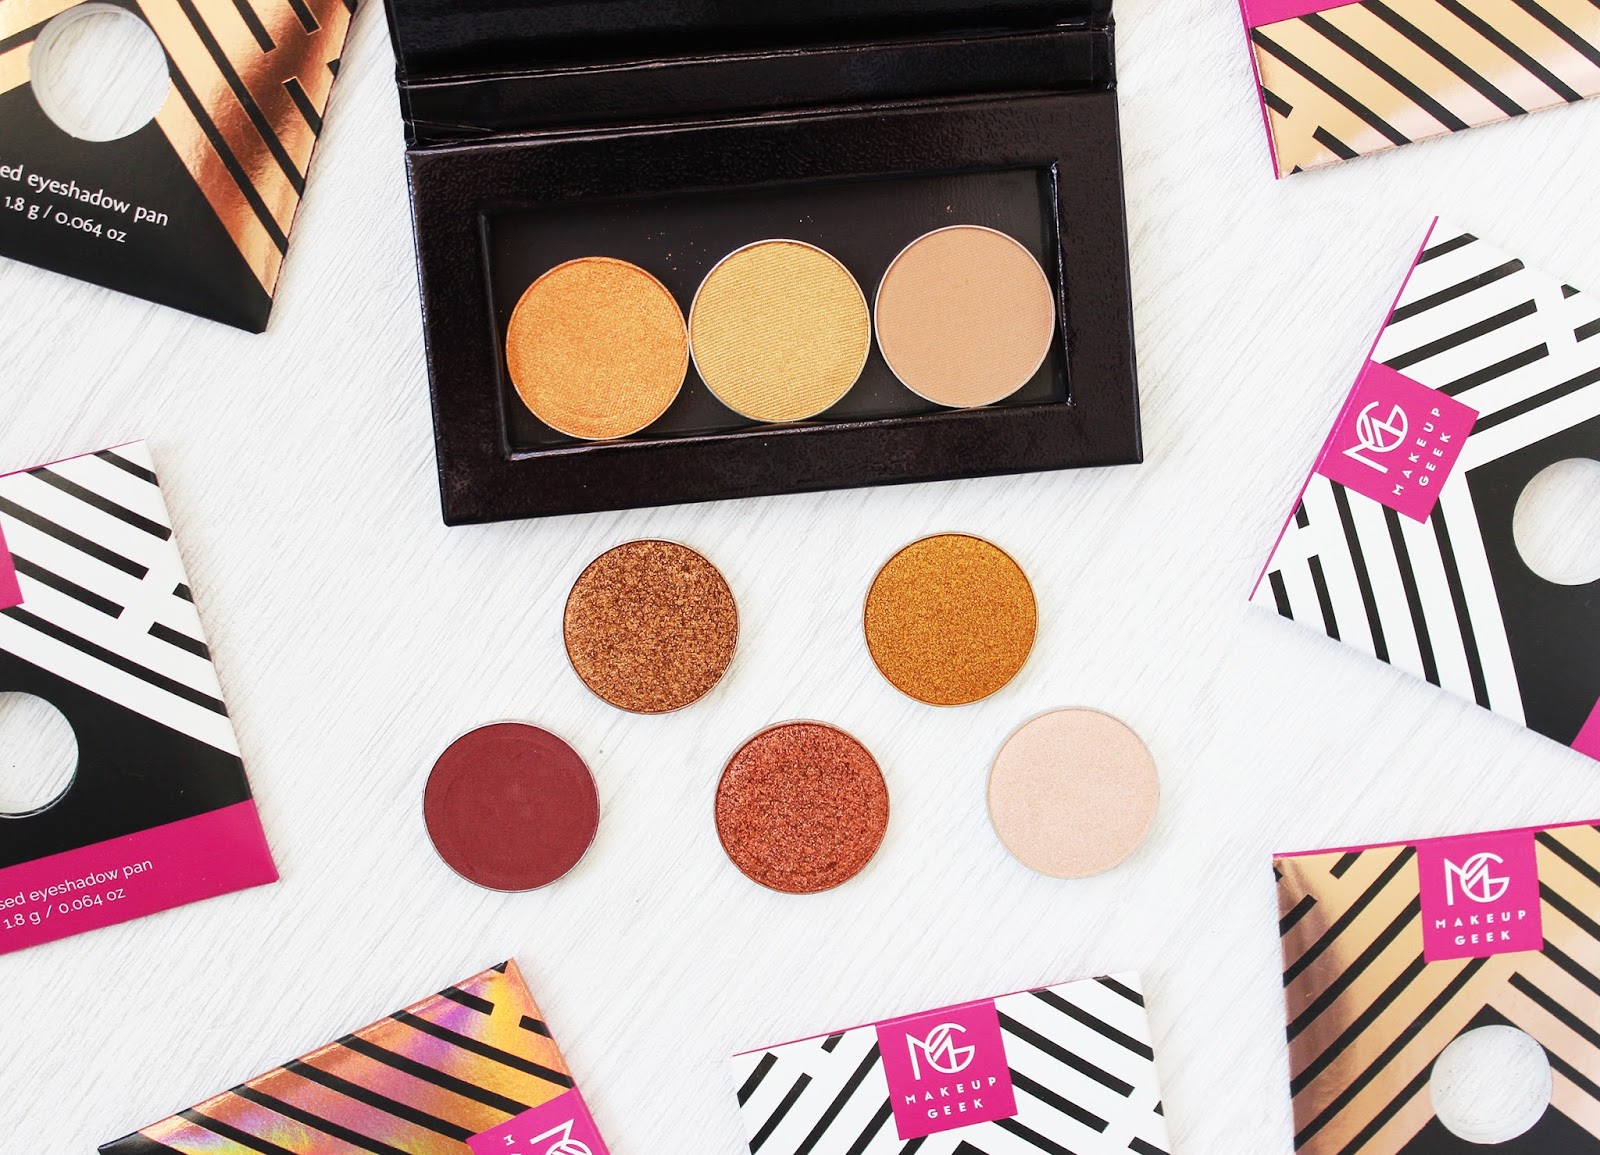 Makeup Geek eye shadow review and swatches